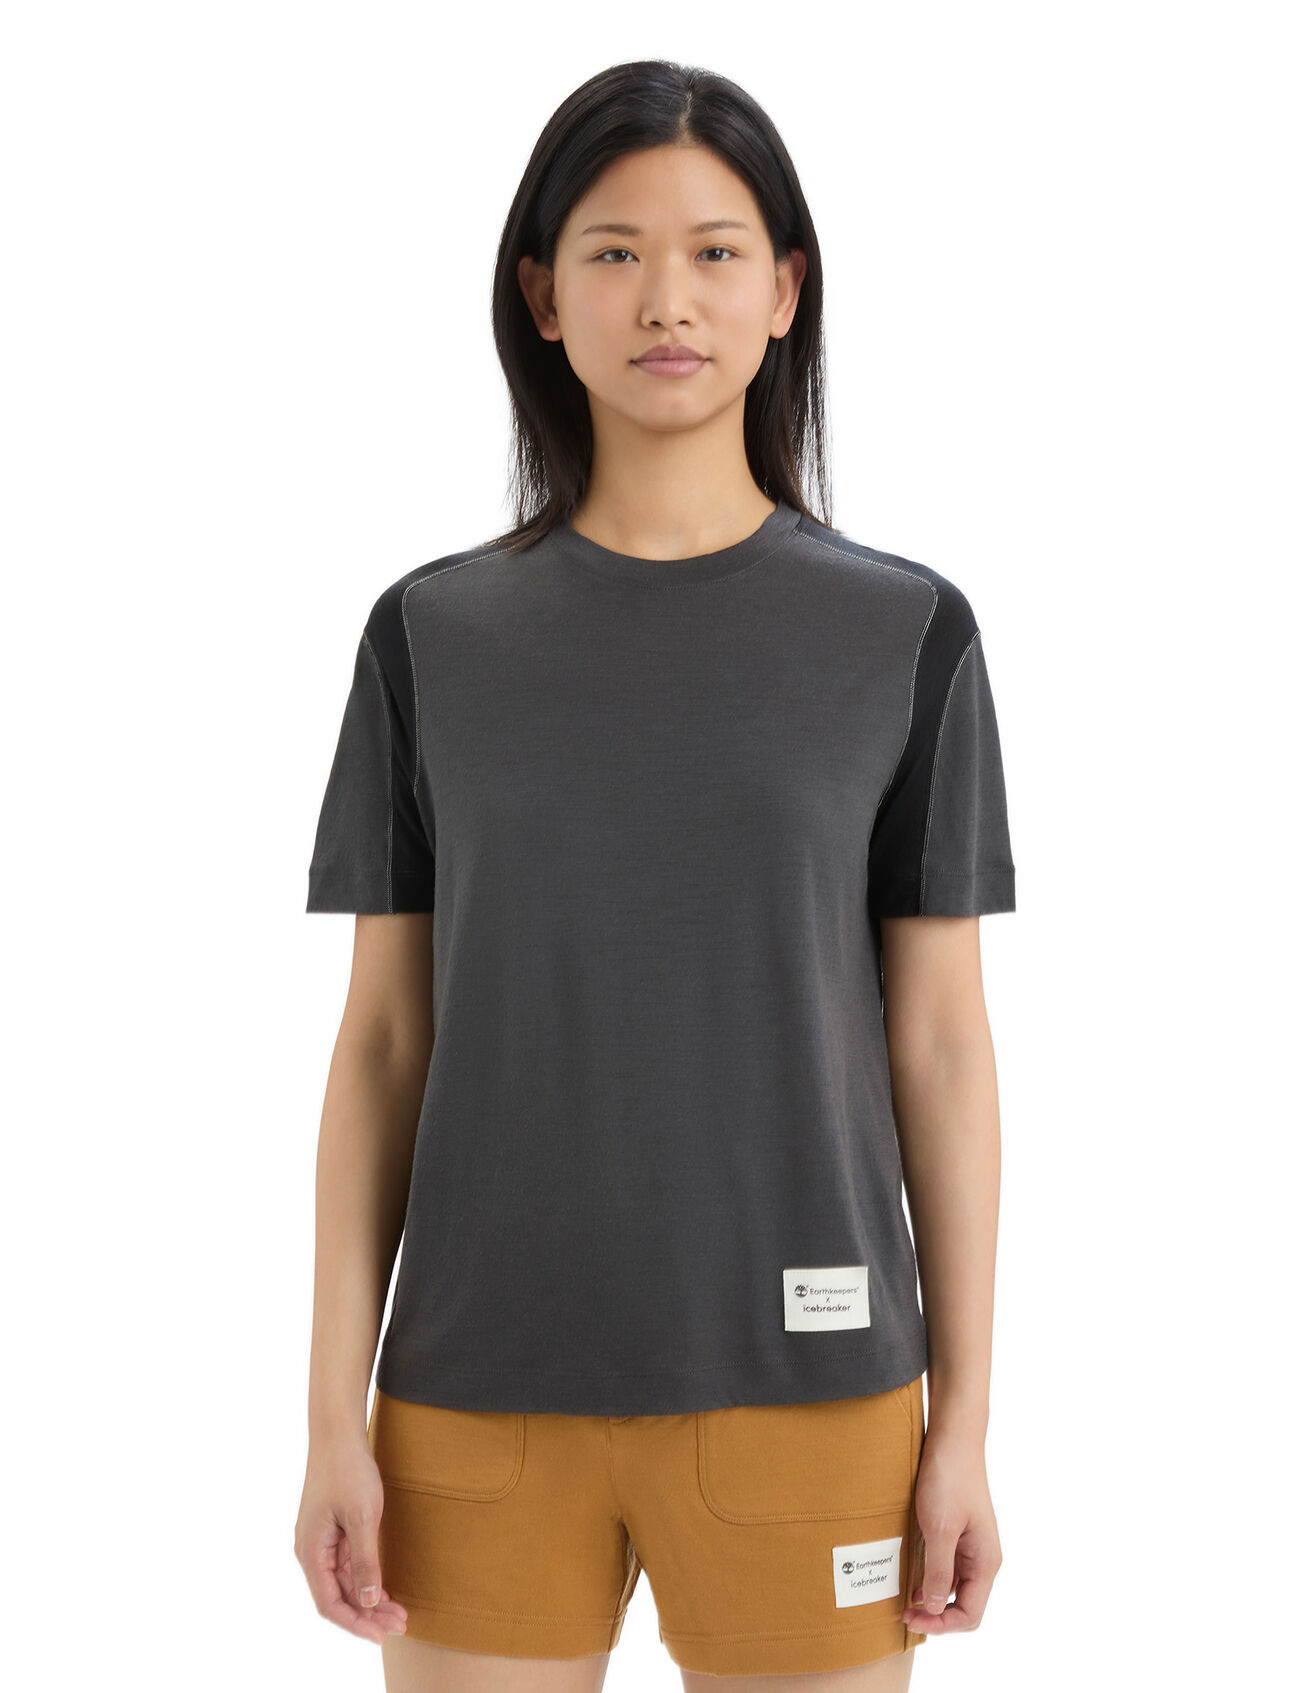 Womens Timberland x icebreaker Merino ZoneKnit™ Short Sleeve T-Shirt Designed in collaboration with Timberland, the Timberland x icebreaker Merino ZoneKnit™ Short Sleeve Tee is a clean, breathable and lightweight top with mesh panels to help regulate your body temperature.